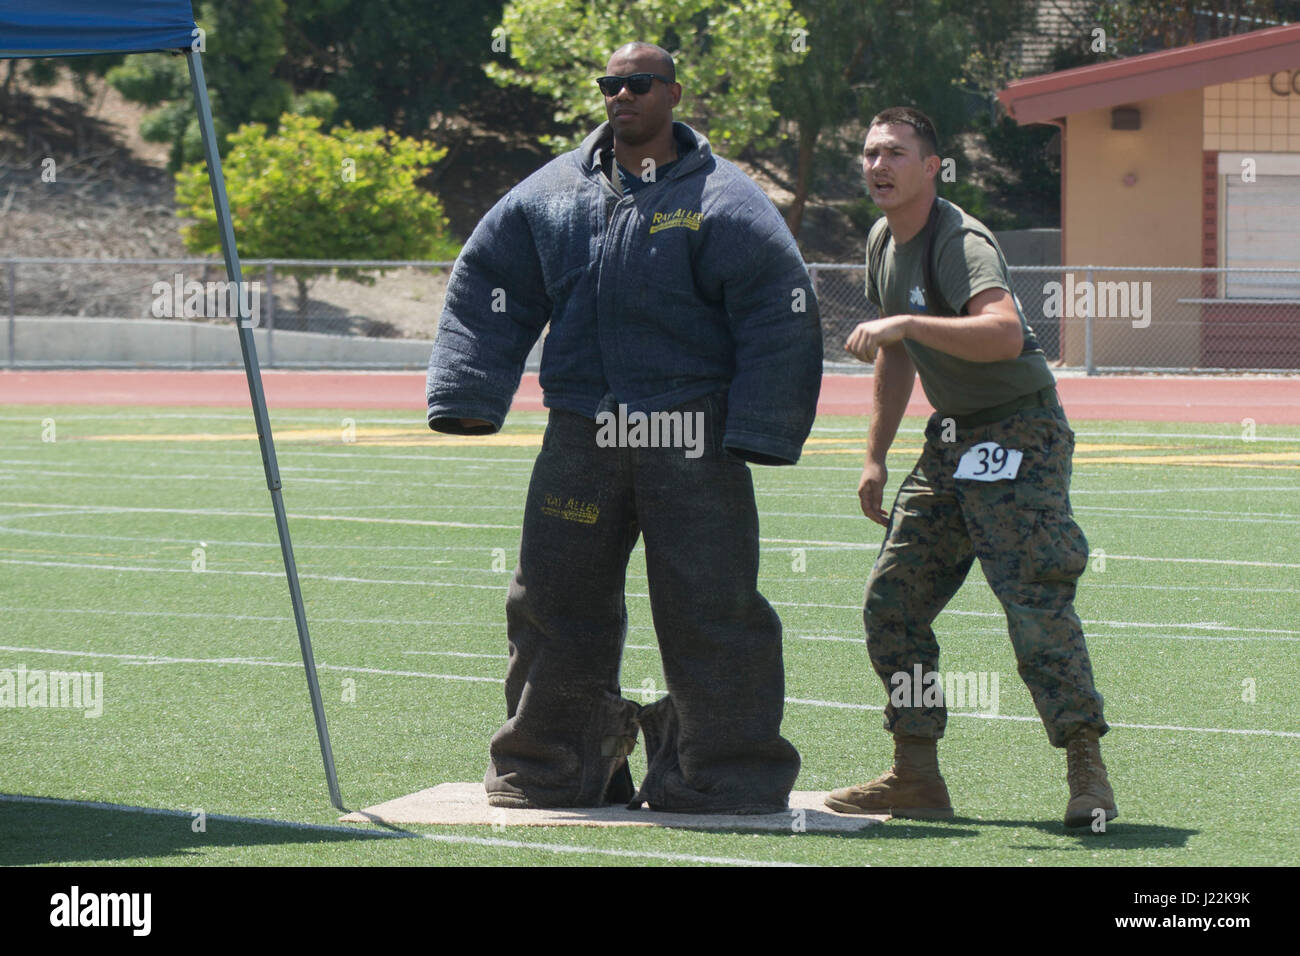 U.S. Marine Corps Lance Cpl. John Ball, right, Provost Marshal Office, calls commands to his canine, Baz, as he navigates through an obstacle for the 1st Annual City of Oceanside Public Safety Fair at El Camino High School football field in Oceanside, Calif., April 22, 2017. (U.S. Marine Corps photo by Lance Cpl. Brooke Woods) Stock Photo